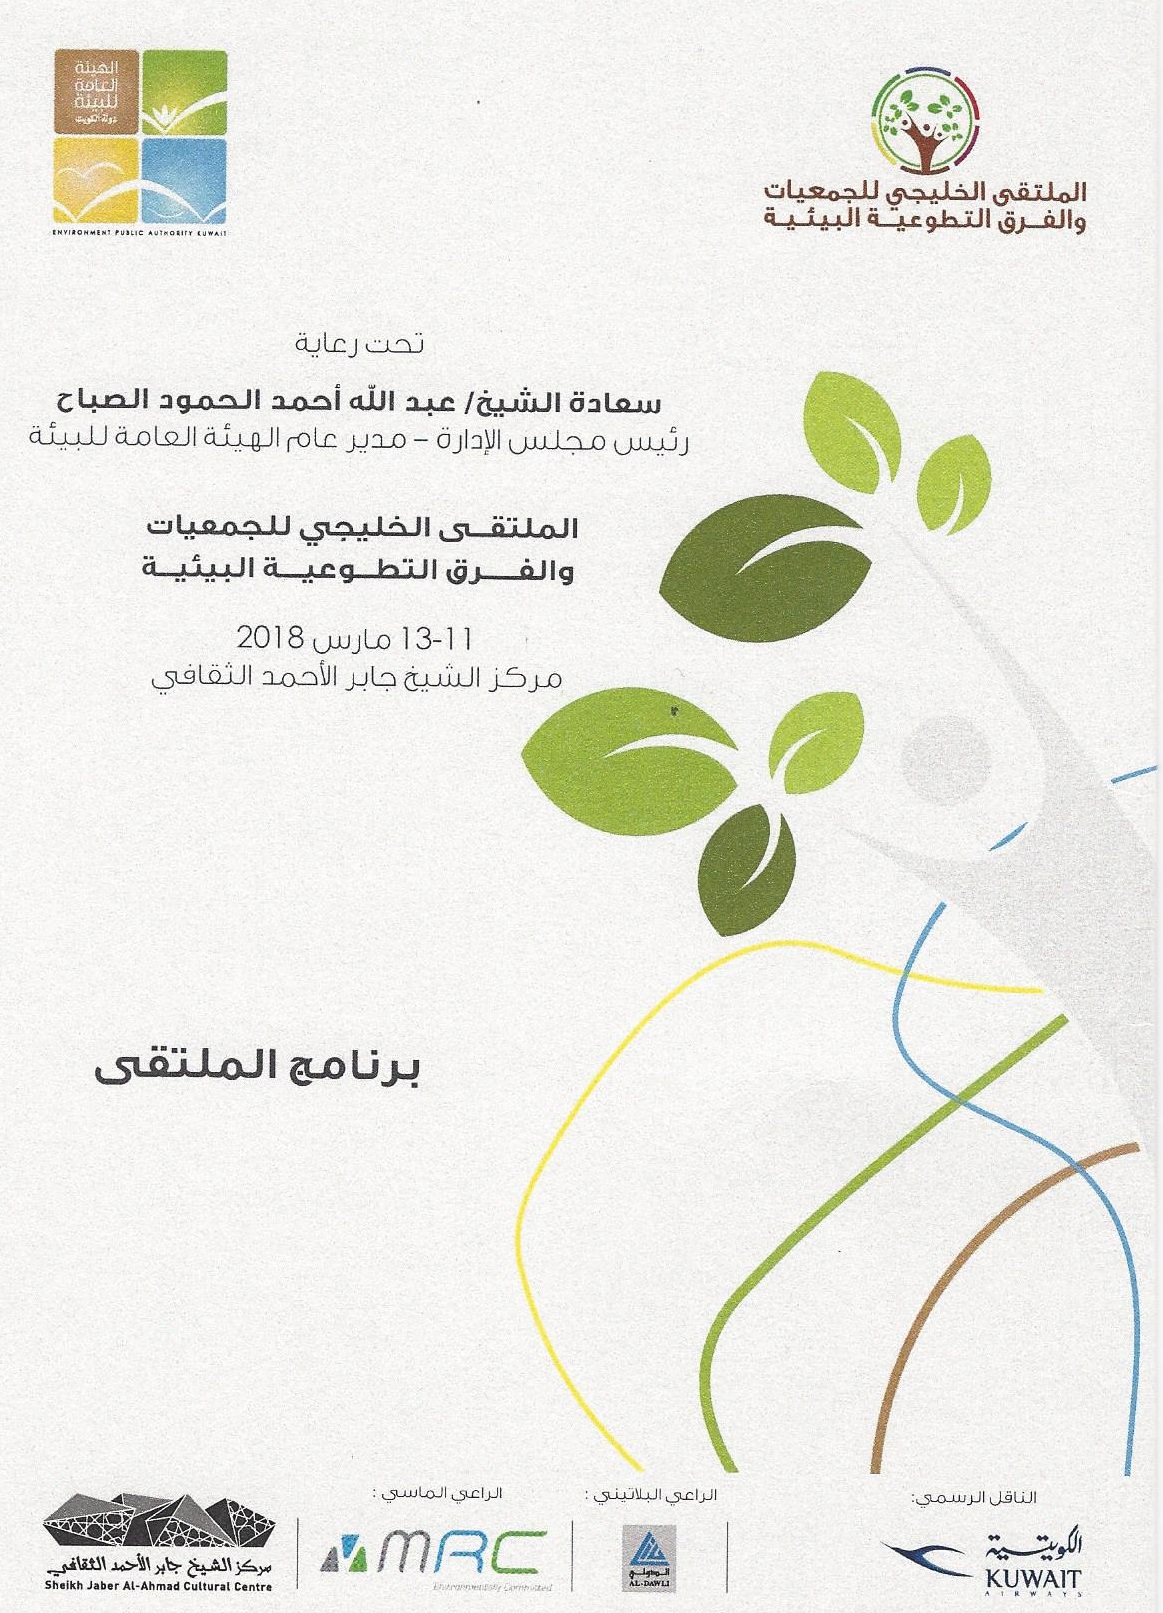 MRC Diamond sponsor of the Gulf Forum for Voluntary and Environmental Voluntary Associations and Associations